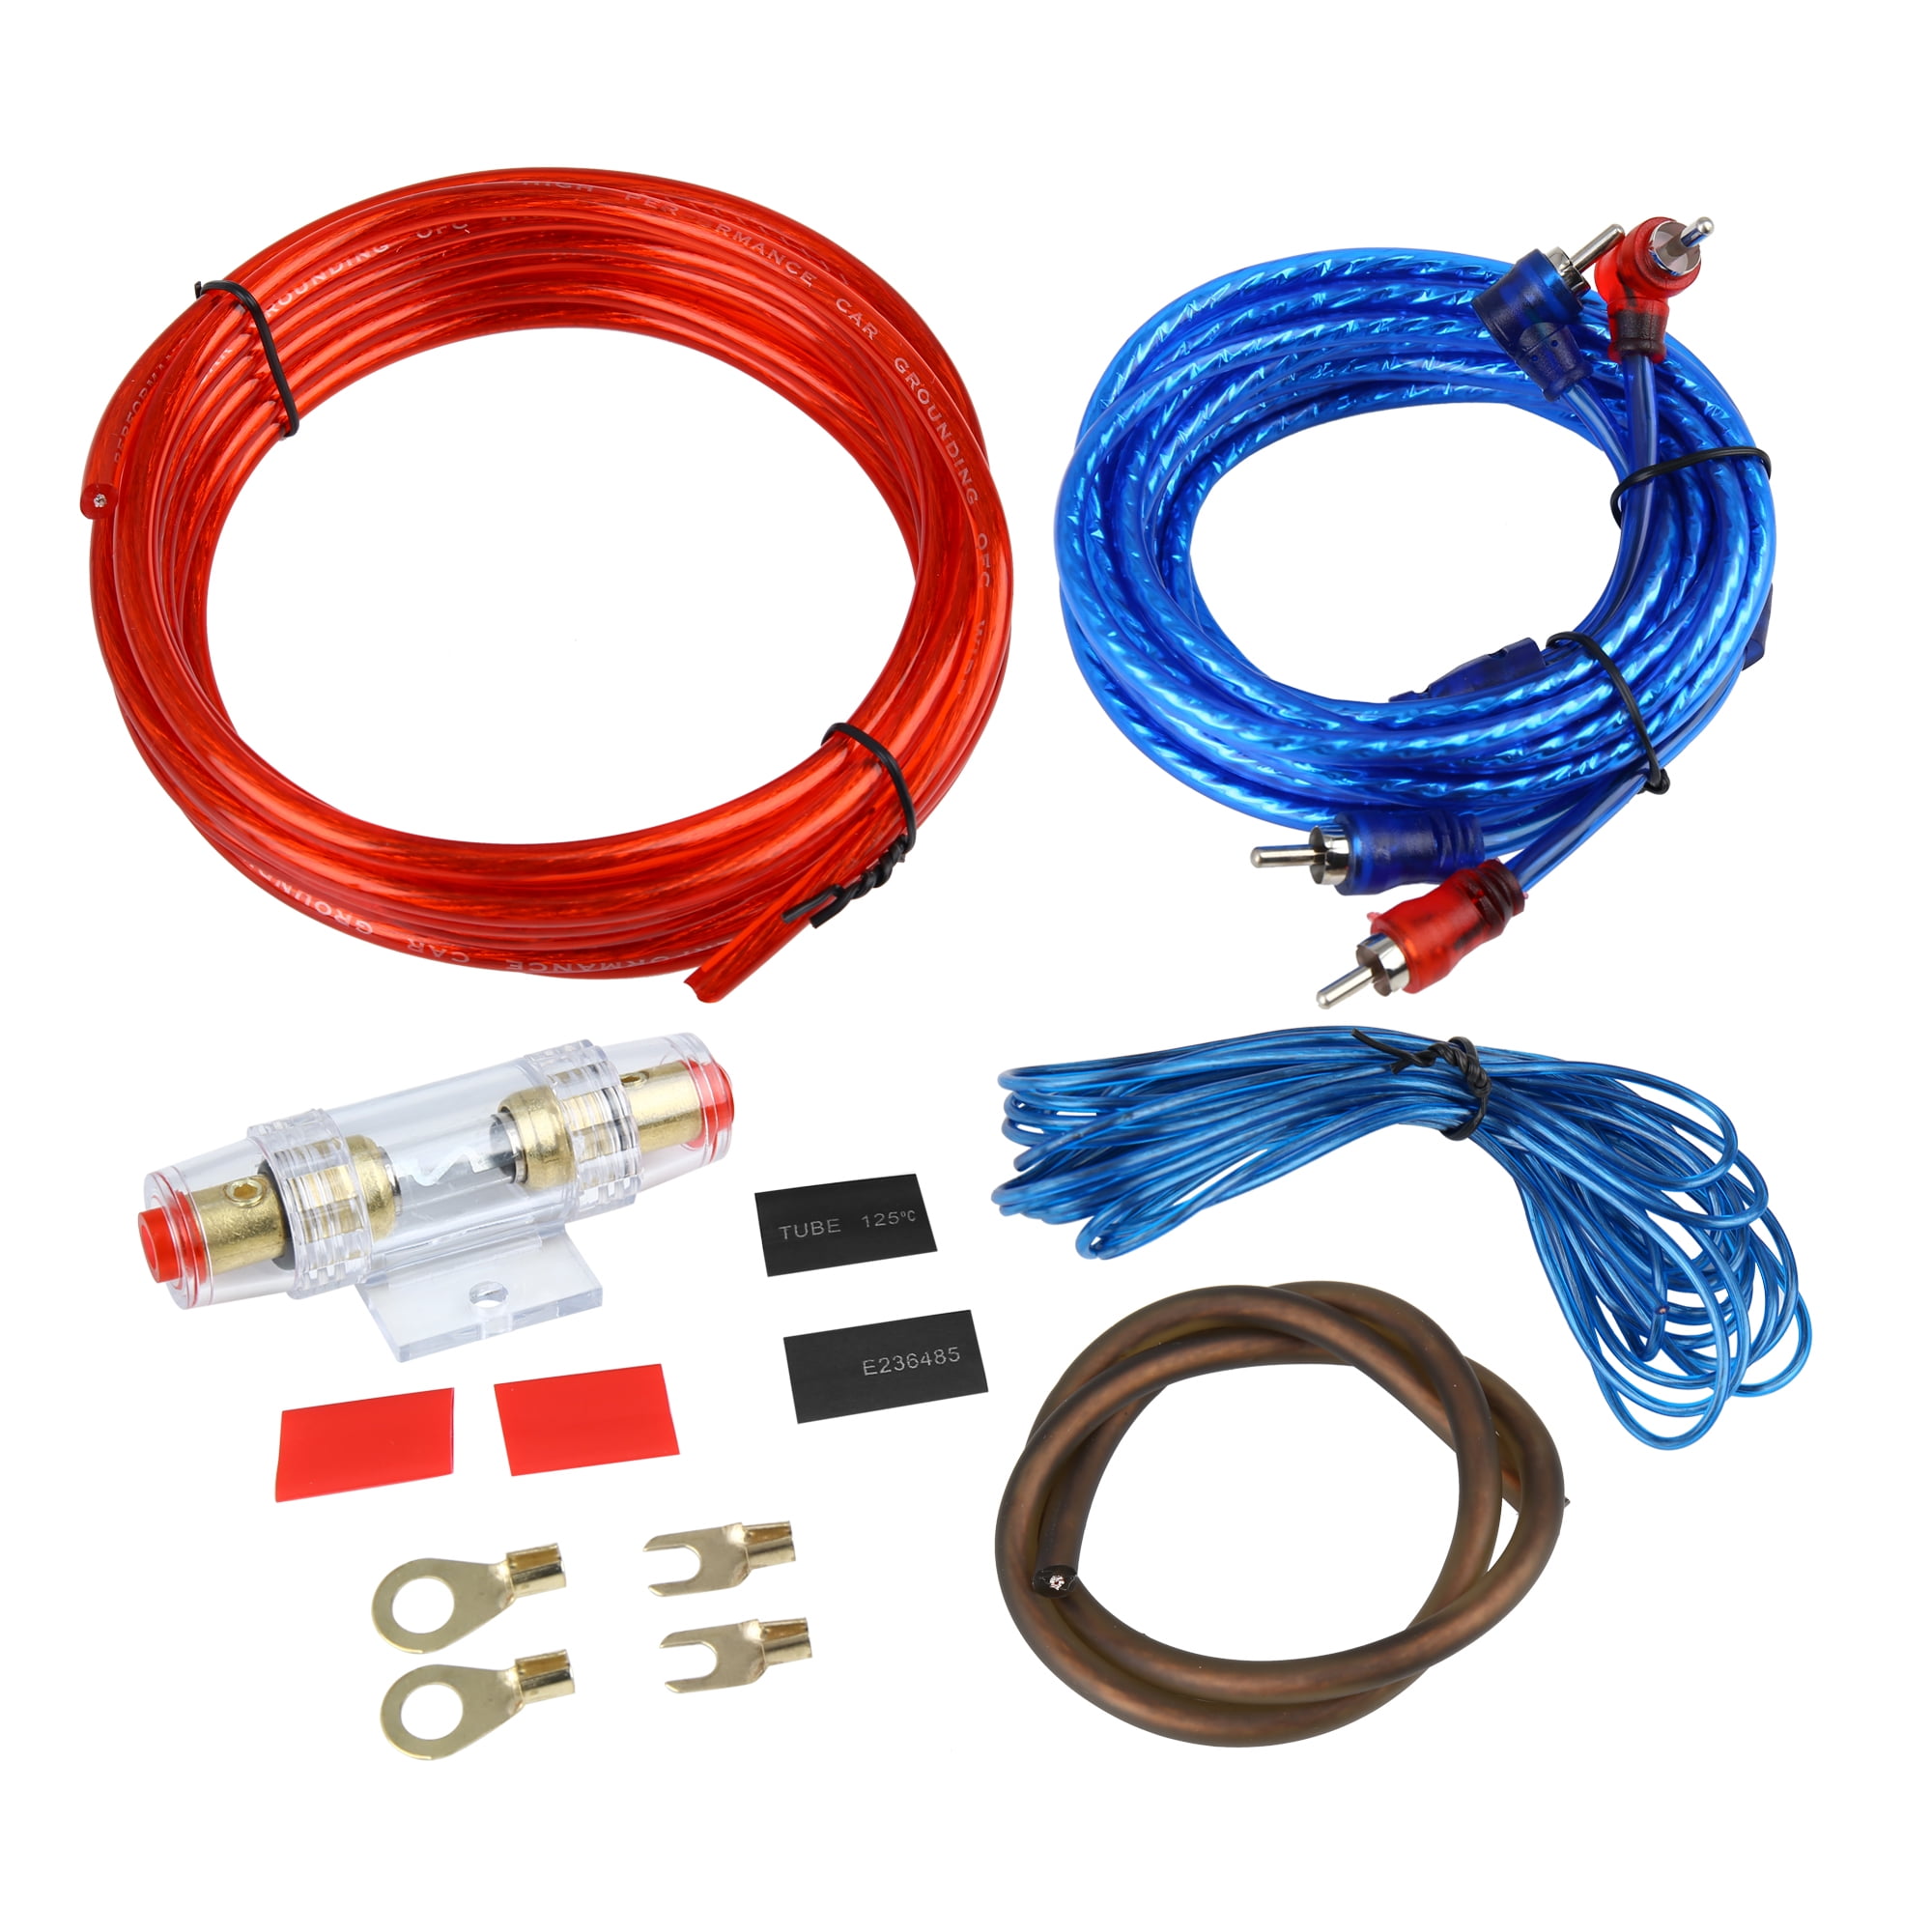 Car Amplifier Wire,Car Audio Subwoofer Amplifier Speaker Installation Wire Cable Kit with Fuse